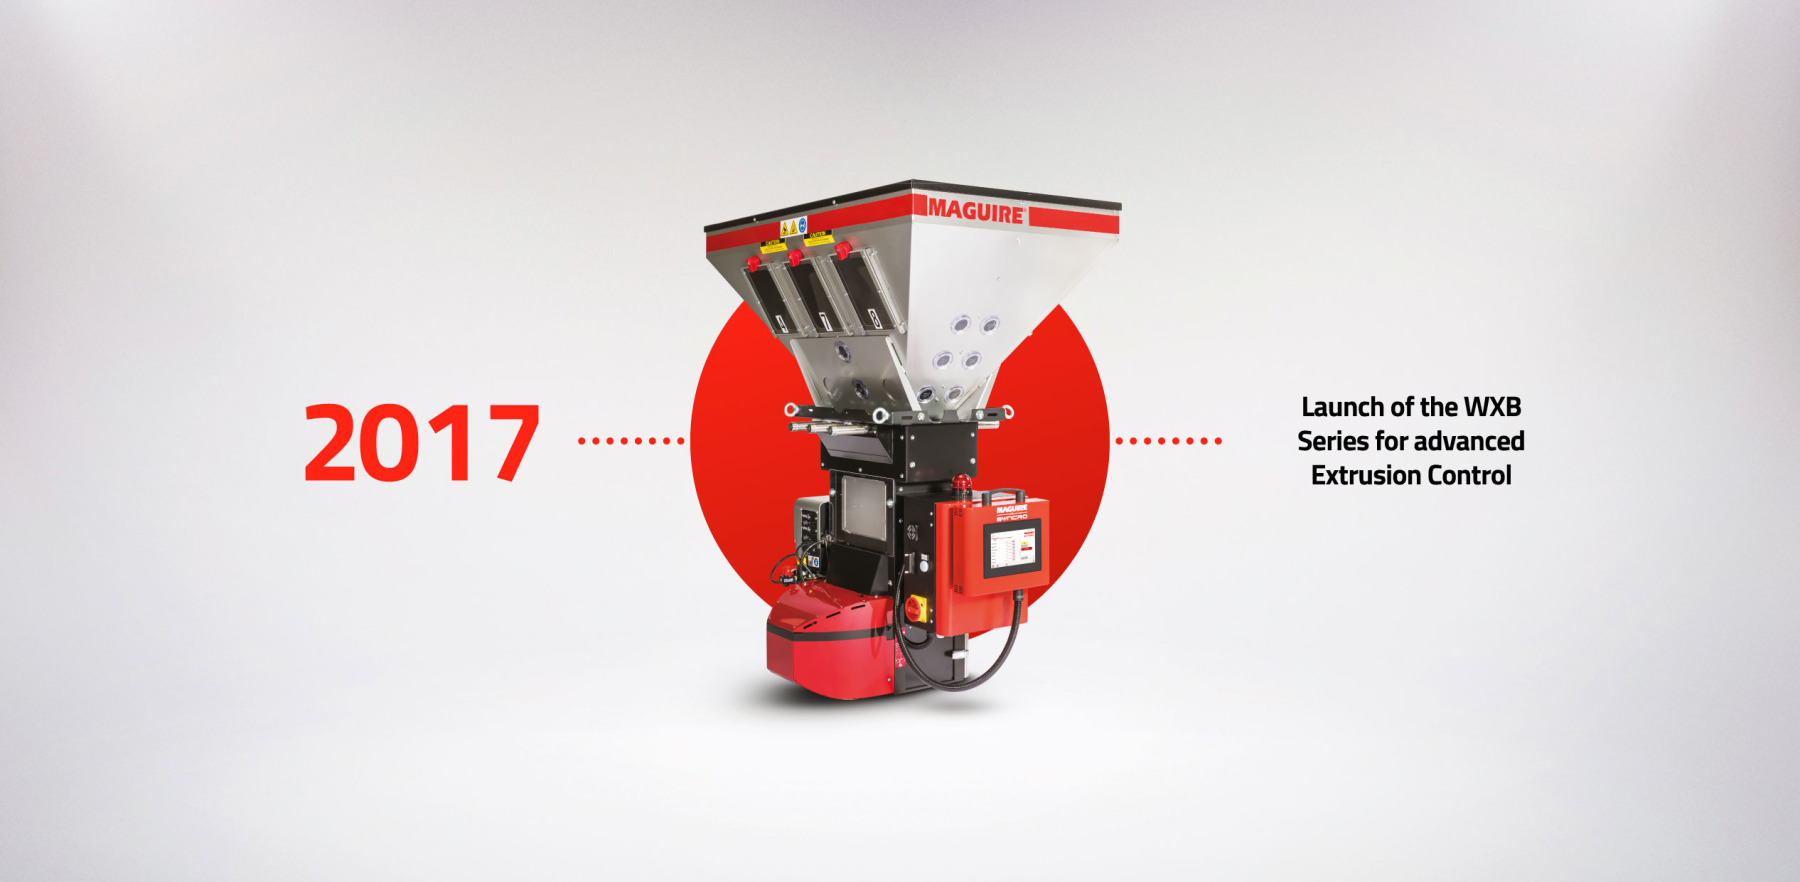 Launch of the WXB Series for advanced Extrusion Control